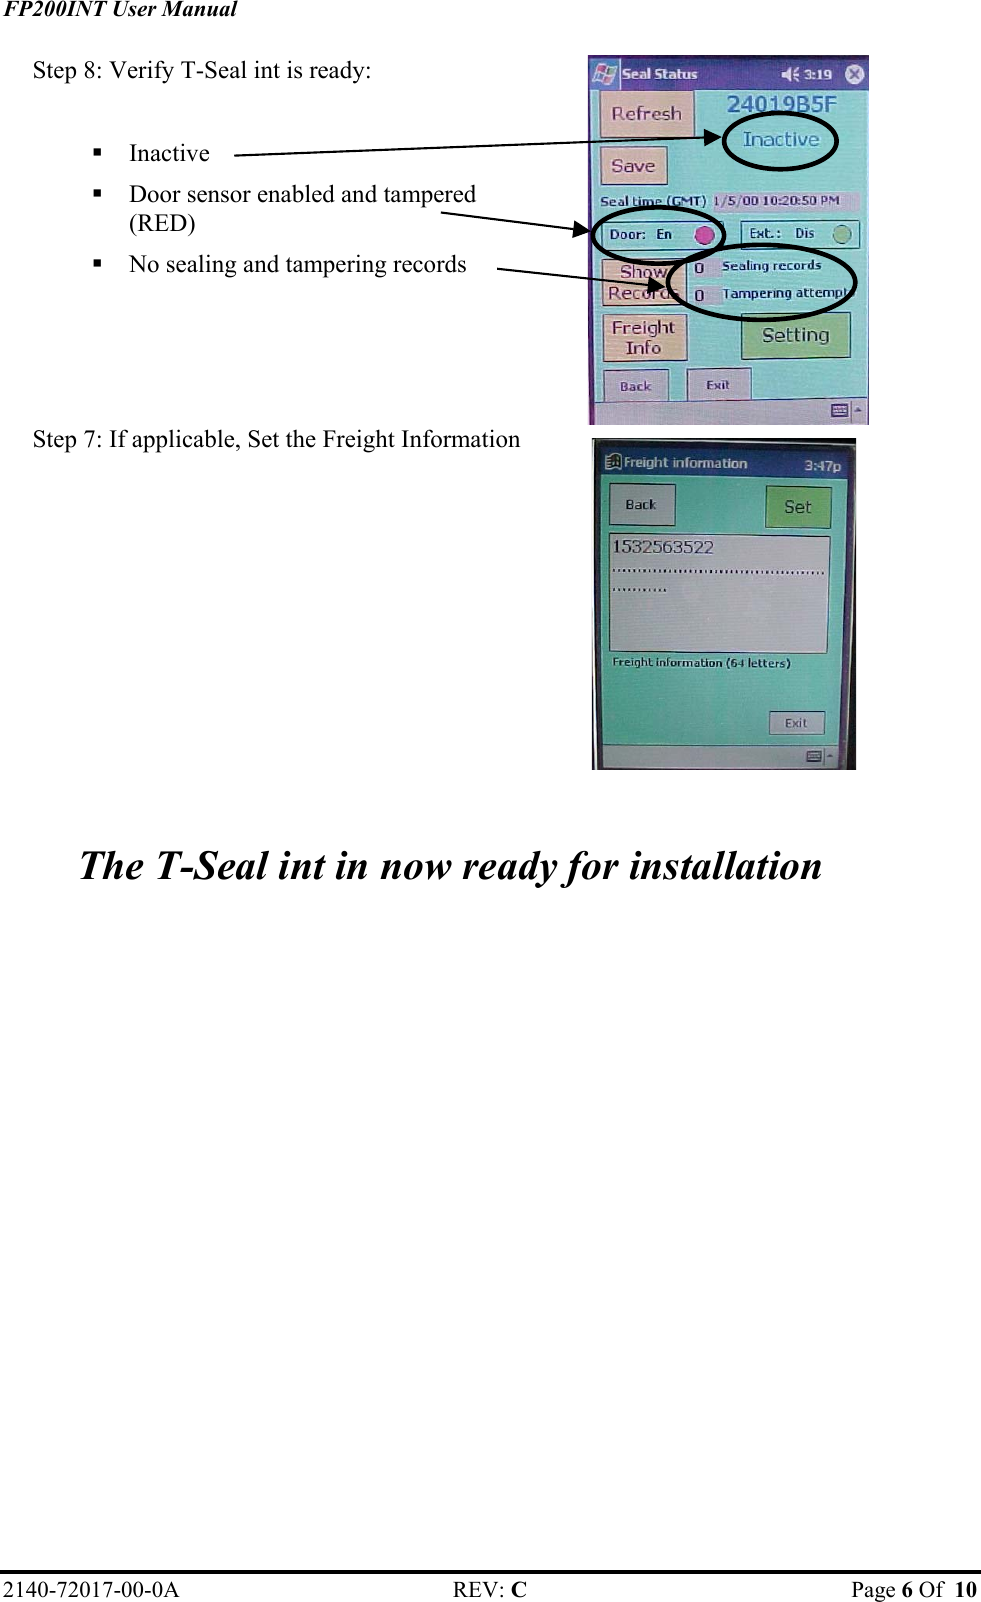 FP200INT User Manual Step 8: Verify T-Seal int is ready:   Inactive  Door sensor enabled and tampered (RED)  No sealing and tampering records   Step 7: If applicable, Set the Freight Information    The T-Seal int in now ready for installation   2140-72017-00-0A REV: C  Page 6 Of  10  